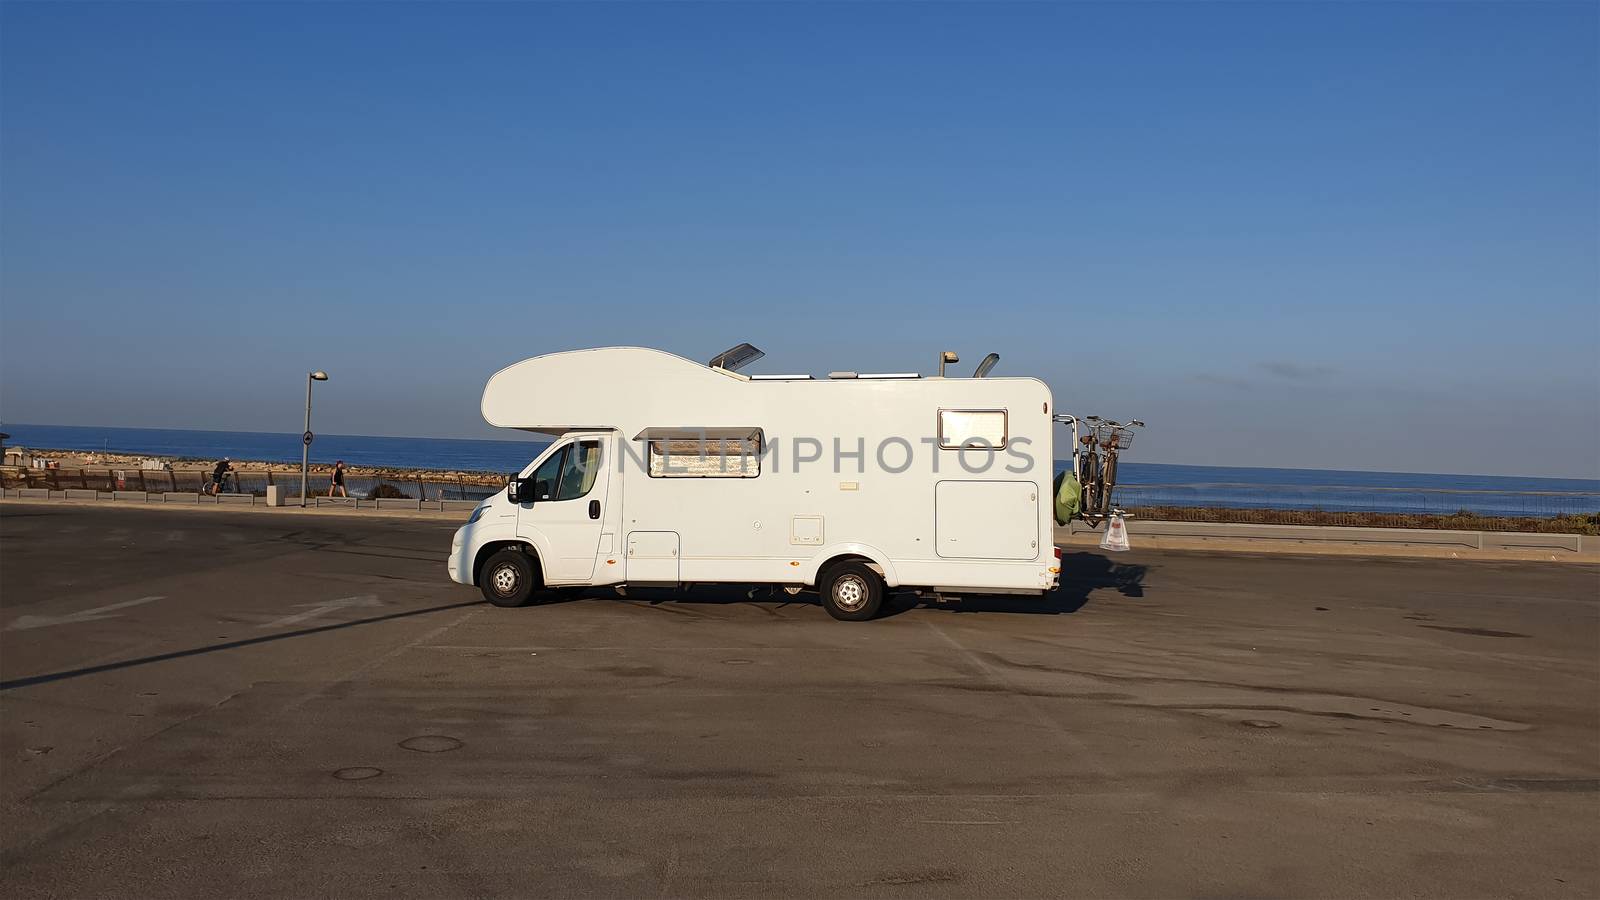 Recreational vehicle in the middle of beach empty parking lot by HD_premium_shots